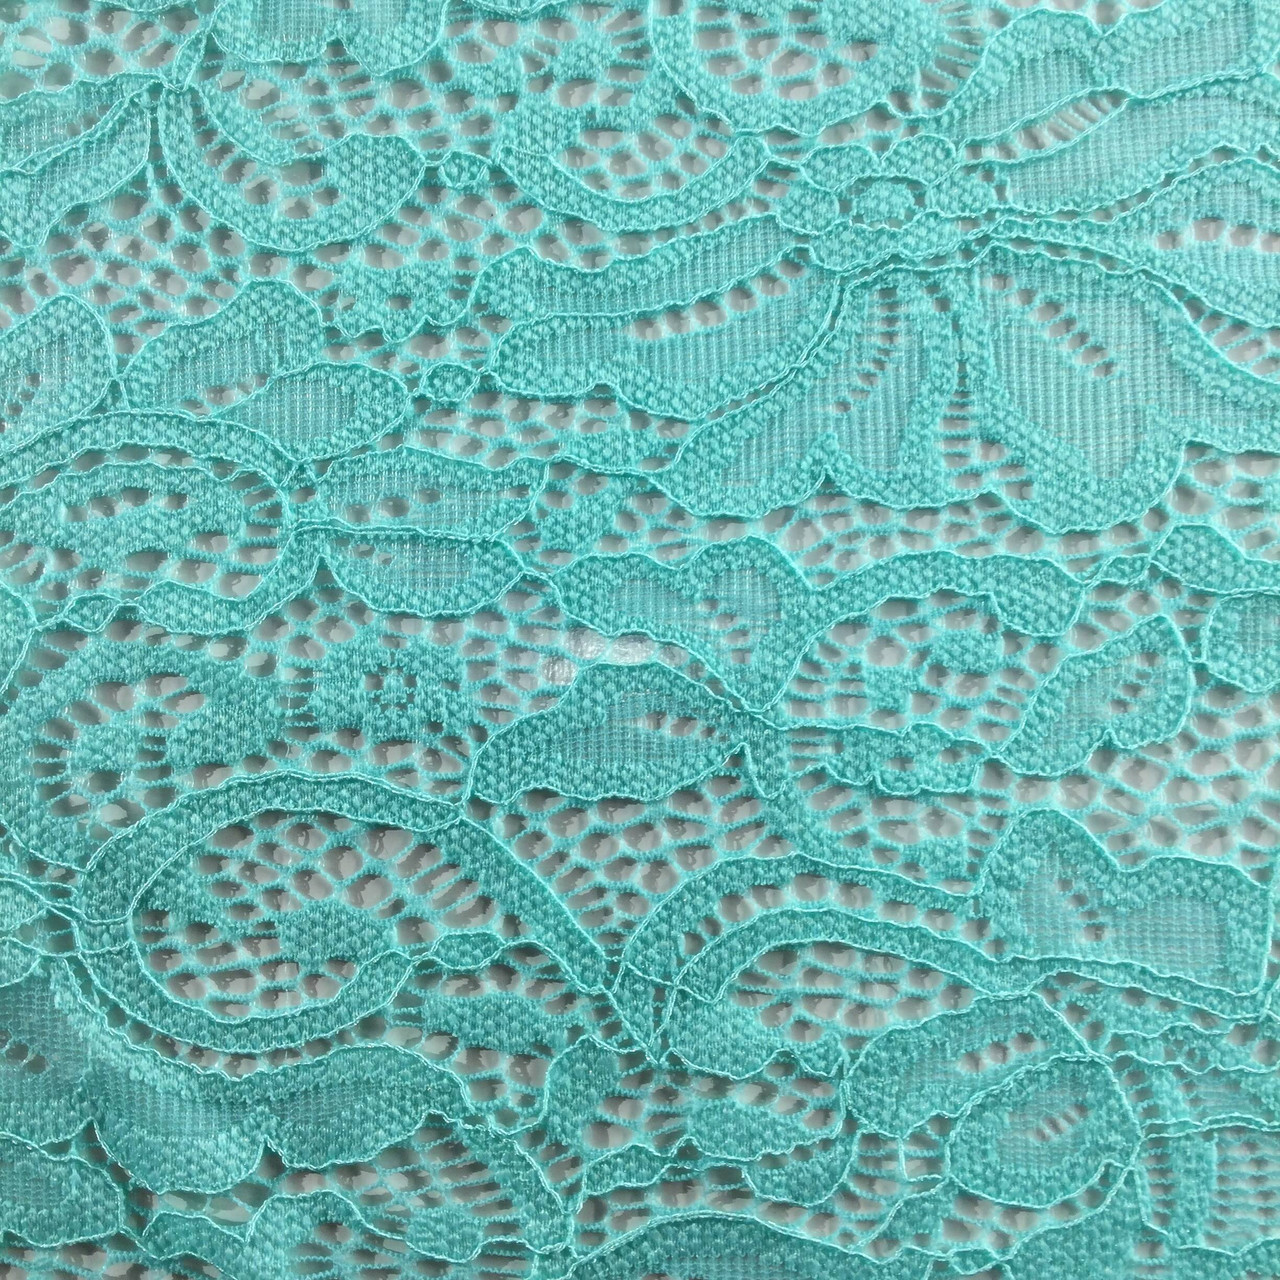 Mint Green Stretch Lace Fabric, Apparel / Curtains, 45 Wide